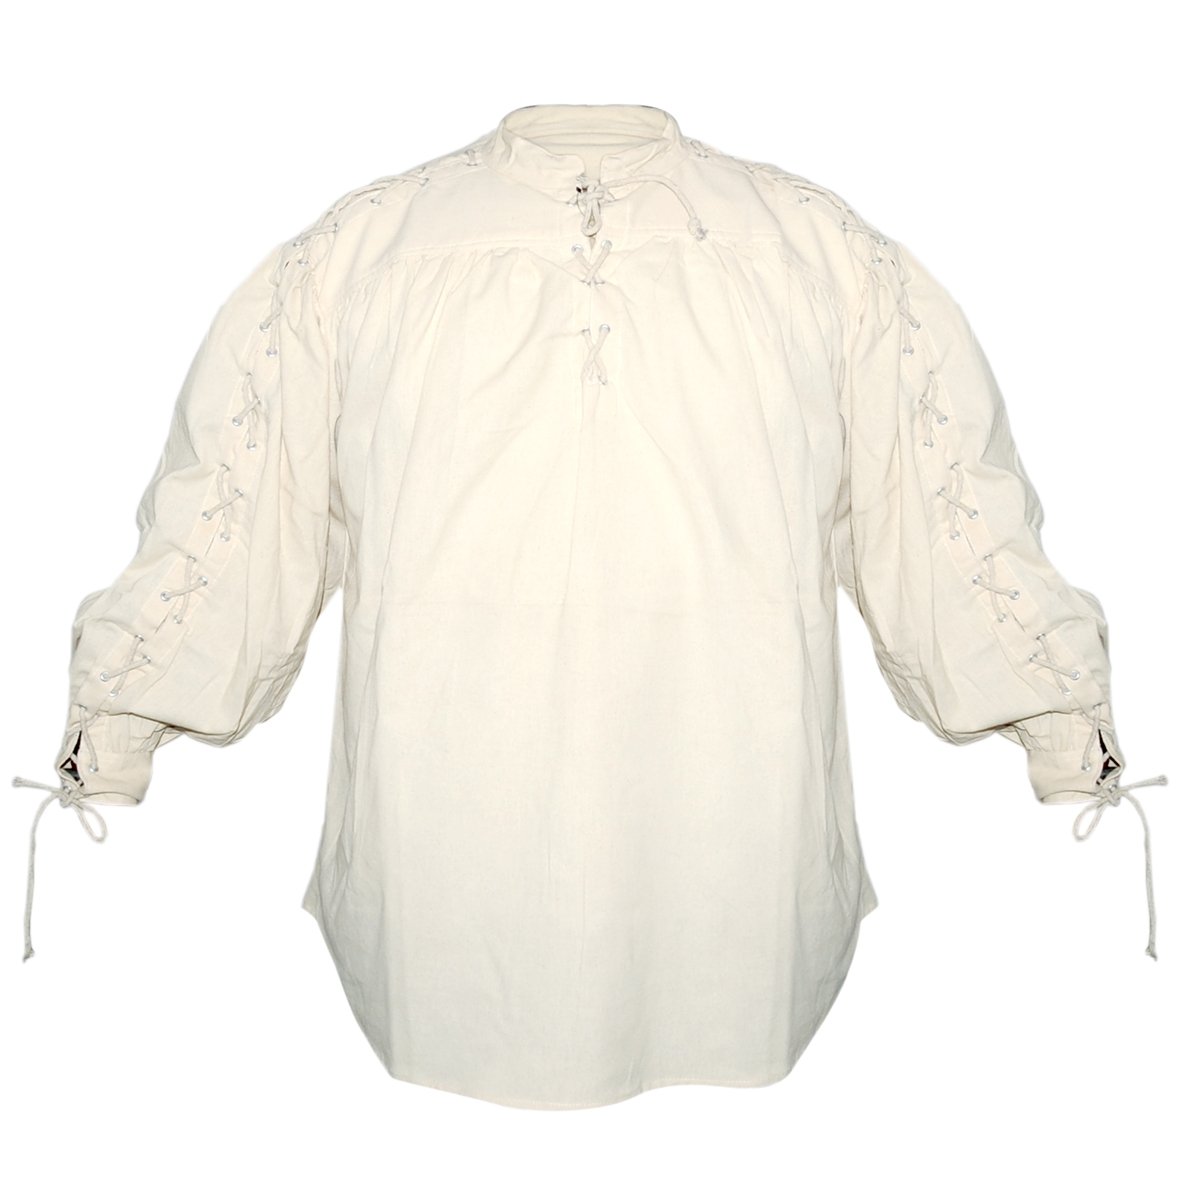 Collarless cotton shirt (laced neck & sleeves) - natural color, Size S